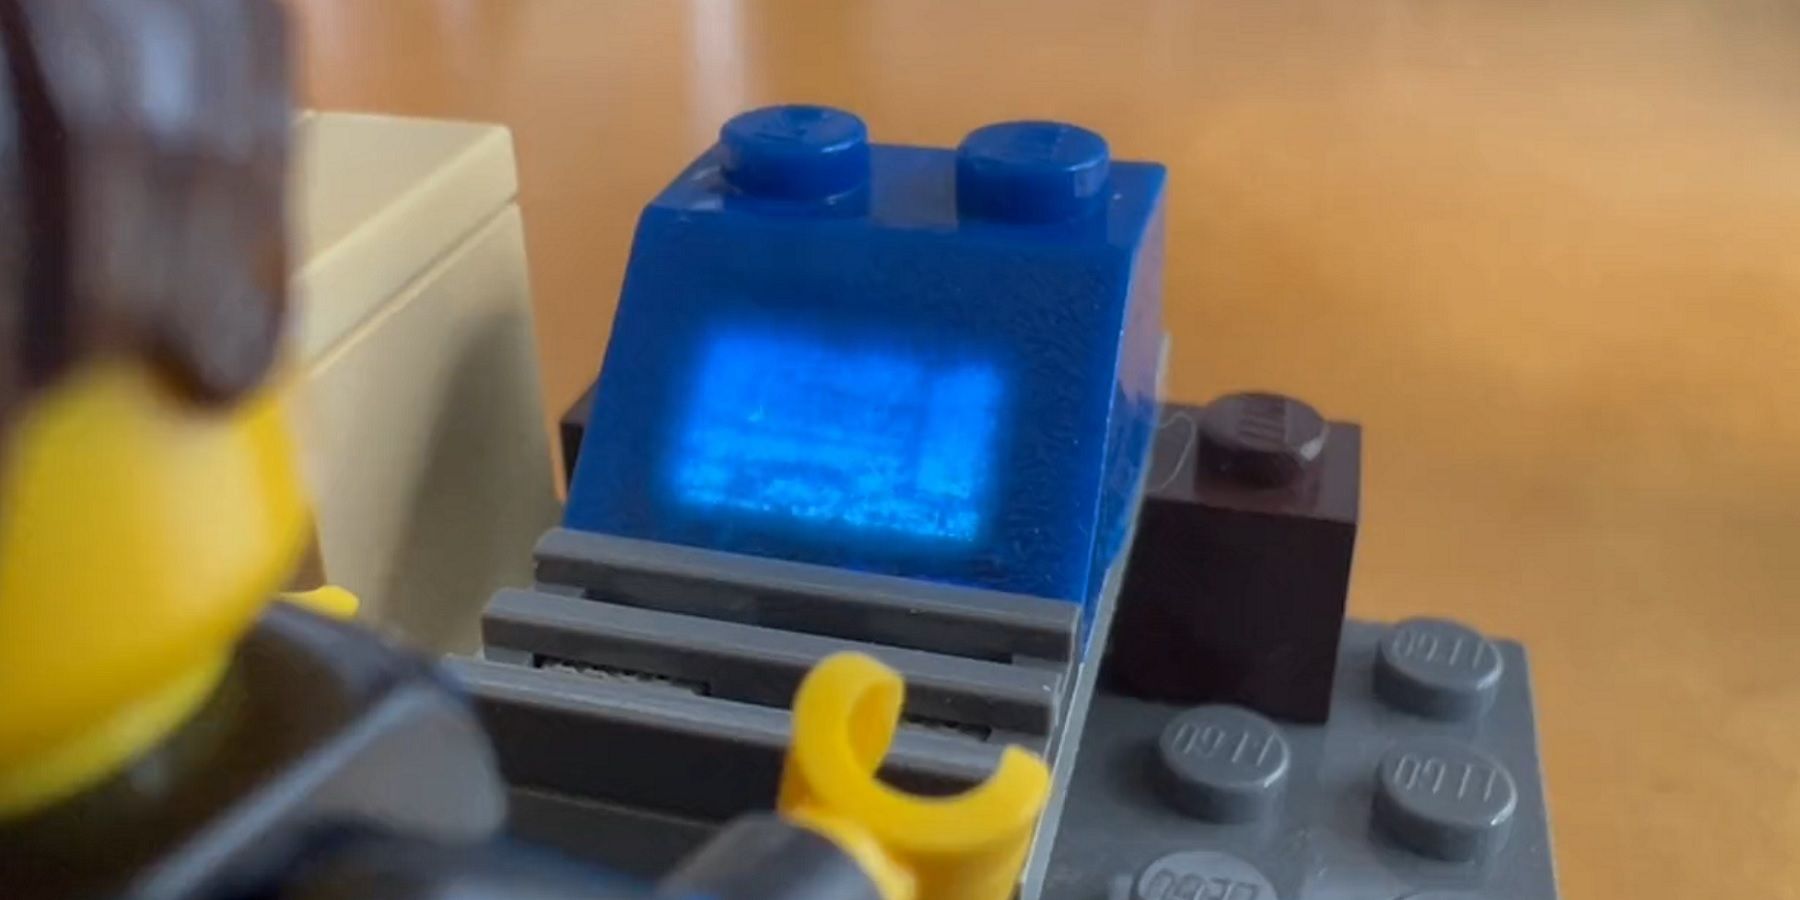 Close-up image of a LEGO brick which is showing a blurry version of Doom.